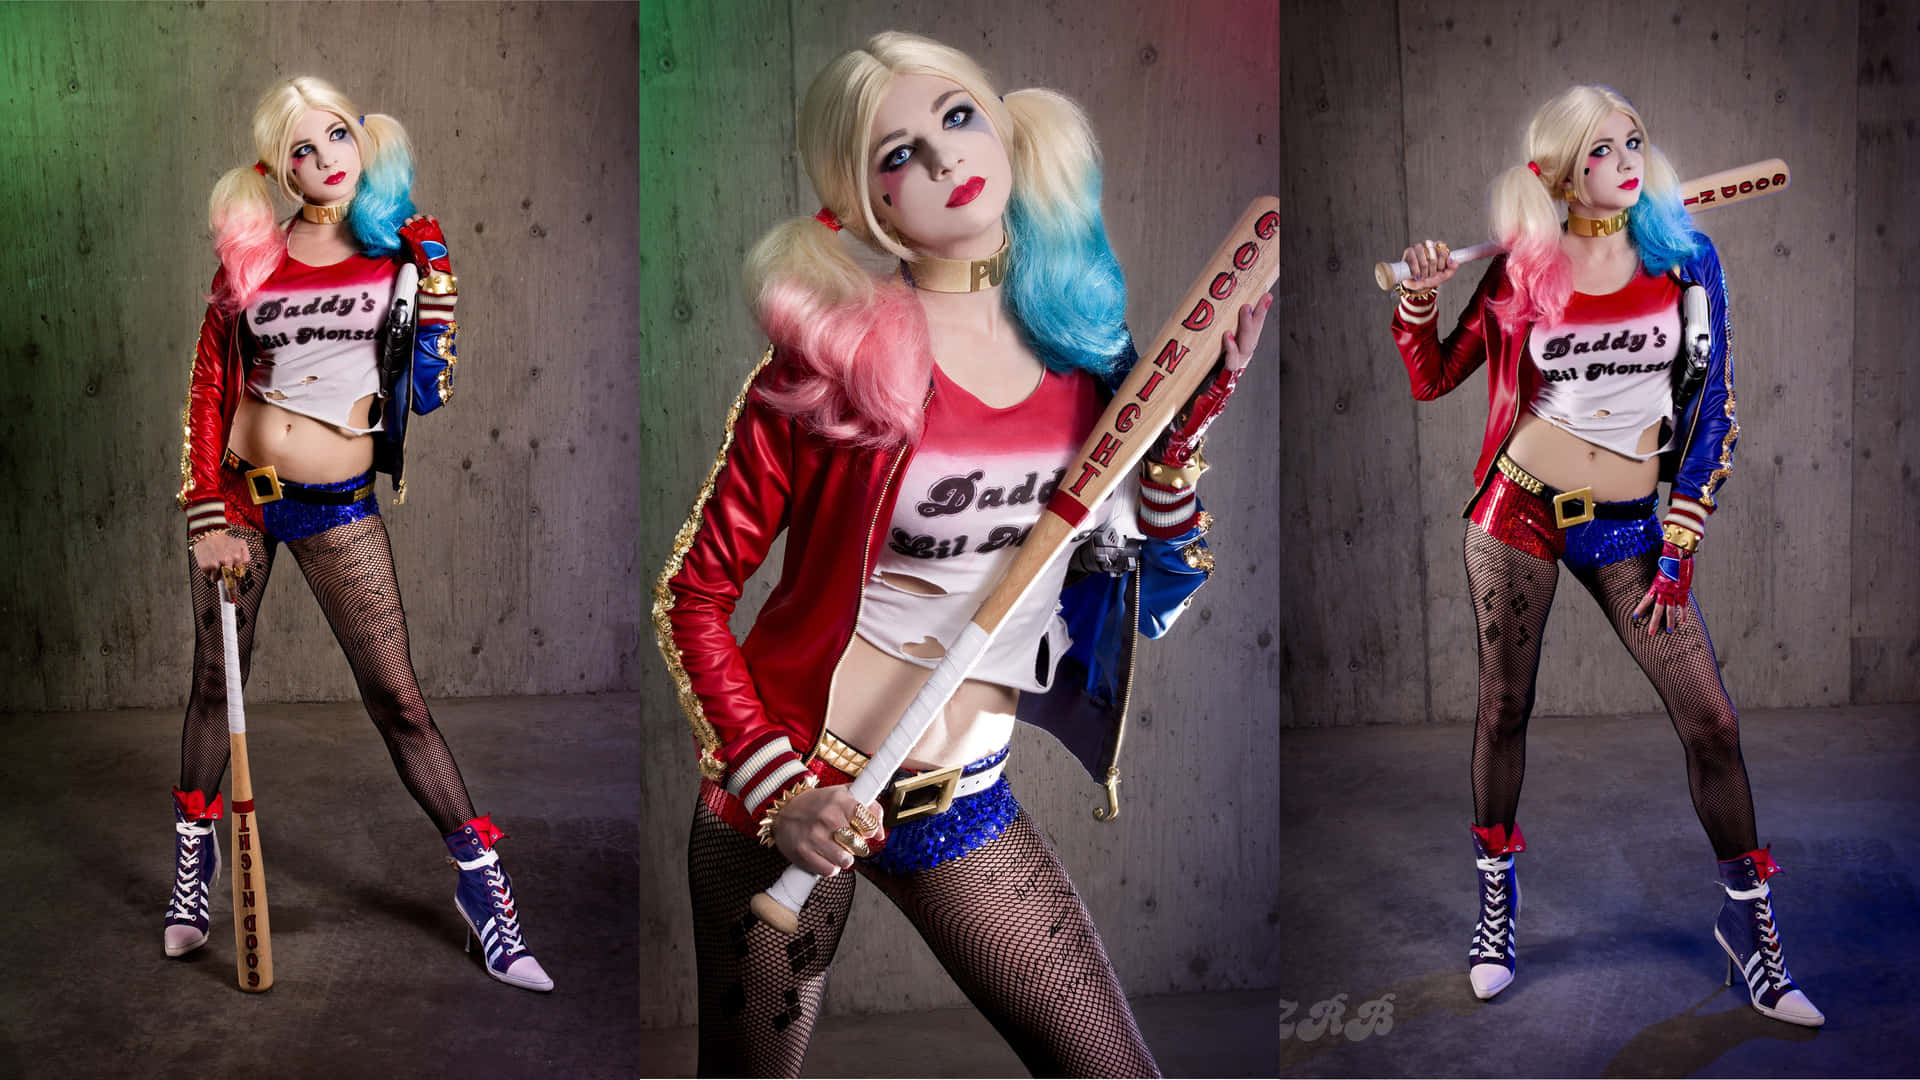 Mesmerizing Harley Quinn cosplay in action Wallpaper